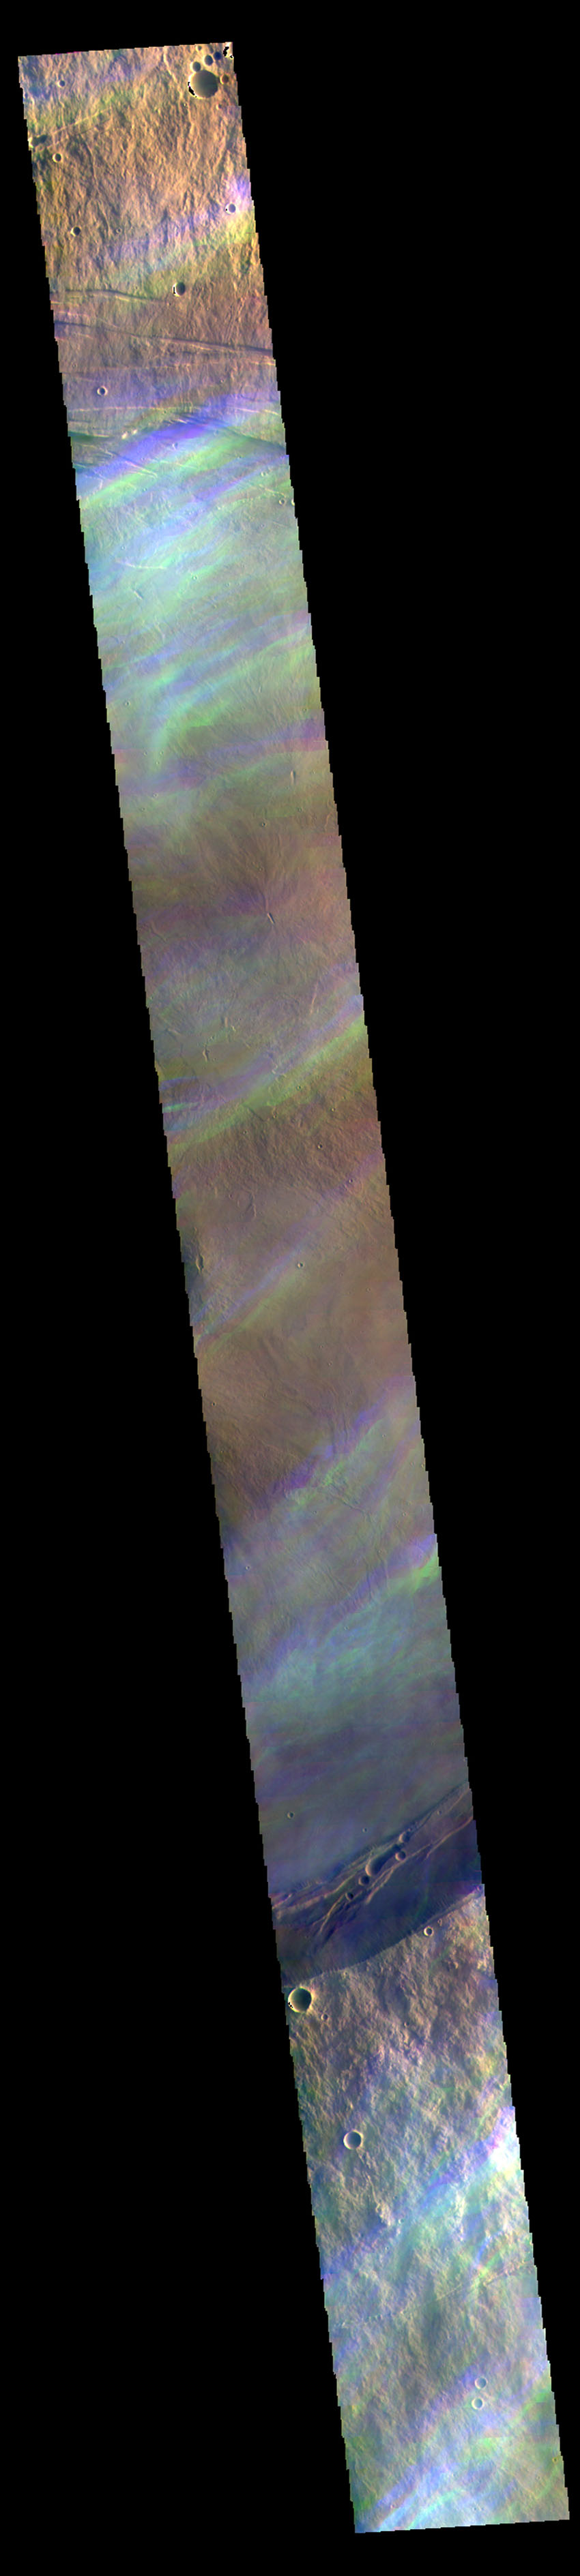 This is an image of ice-rich clouds in false color, taken by the Odyssey satellite orbiting Mars.